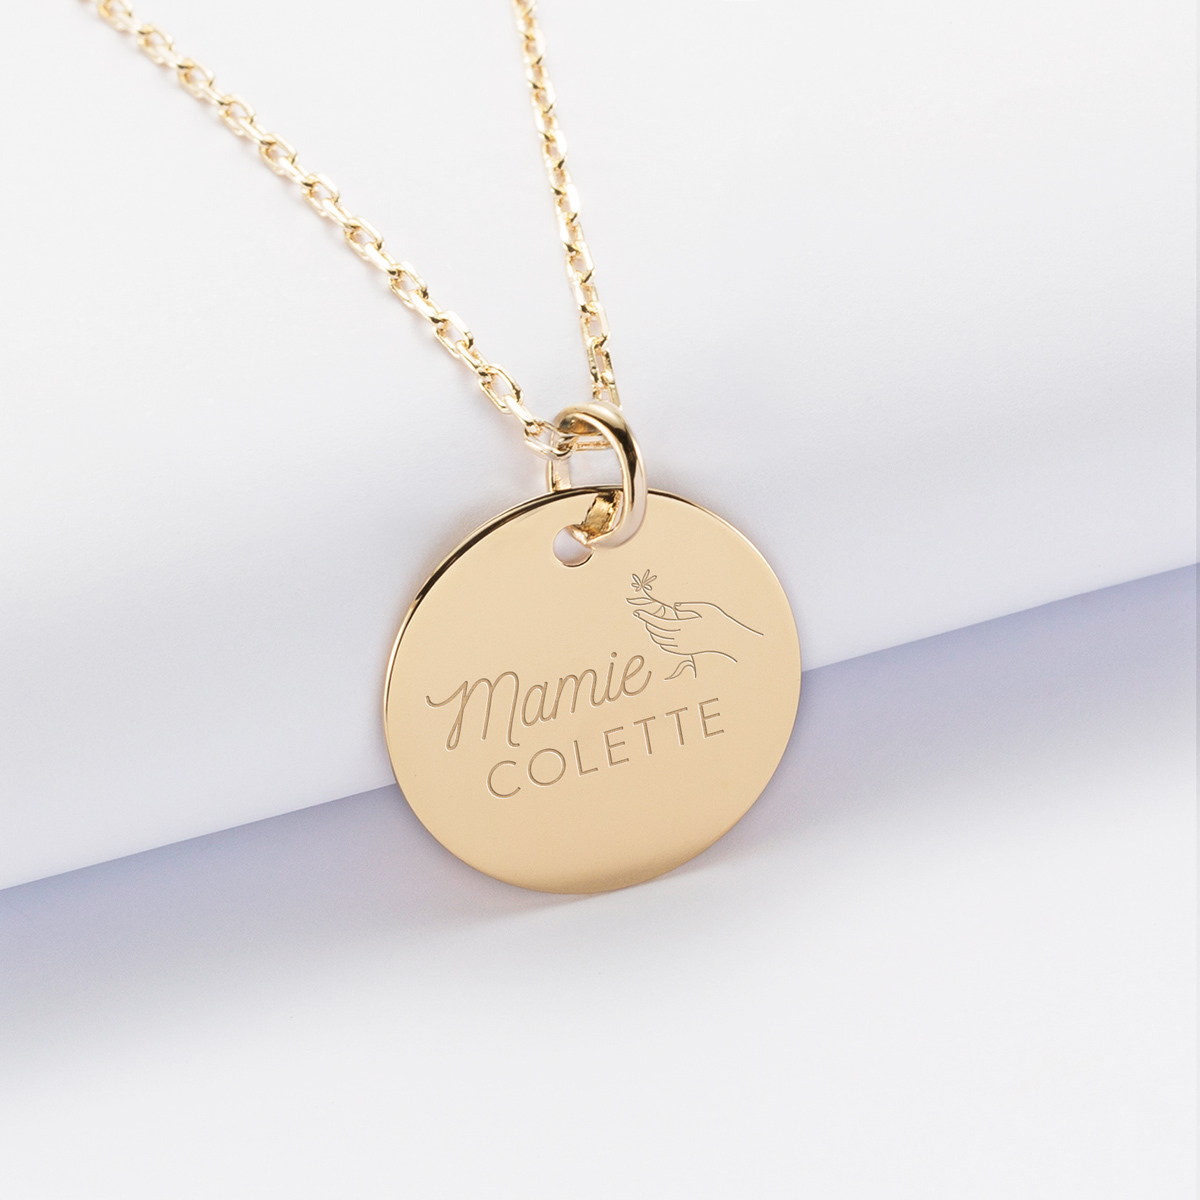 Personalised engraved gold-plated 19 mm medallion pendant - "Granny bouquet" special edition